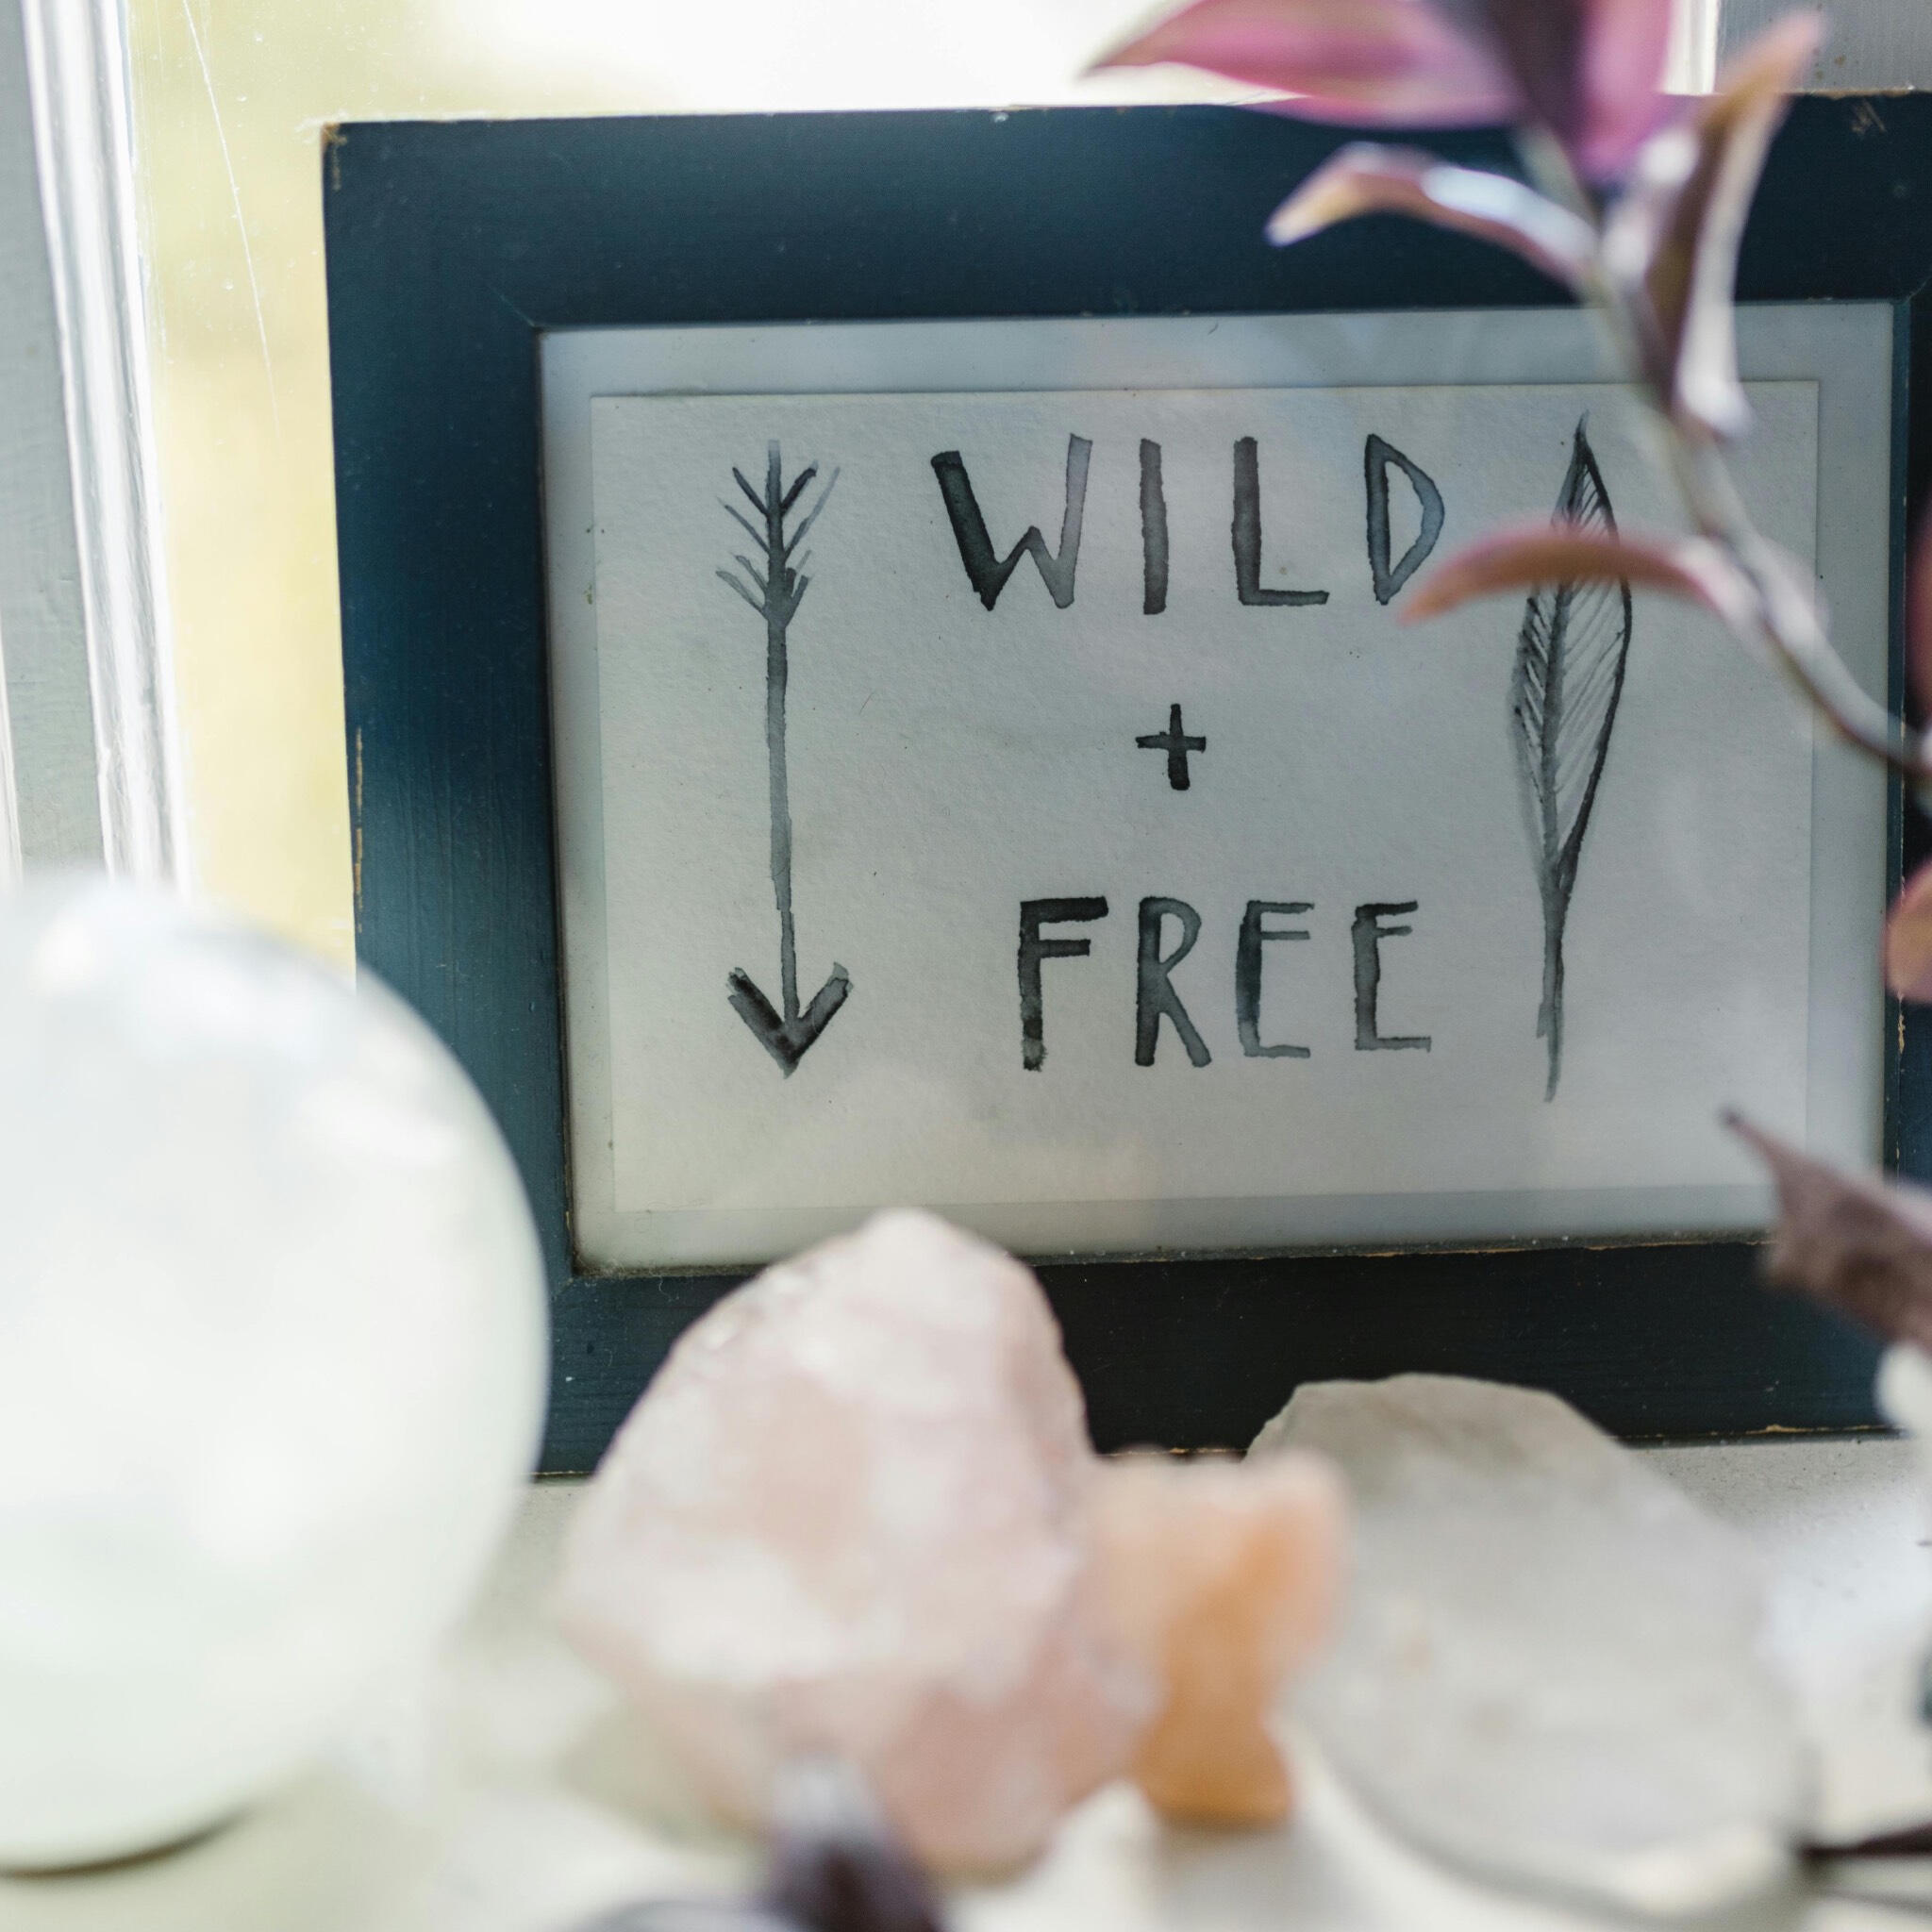 This is a photo of some crystals in front of a sign saying Wild and Free.